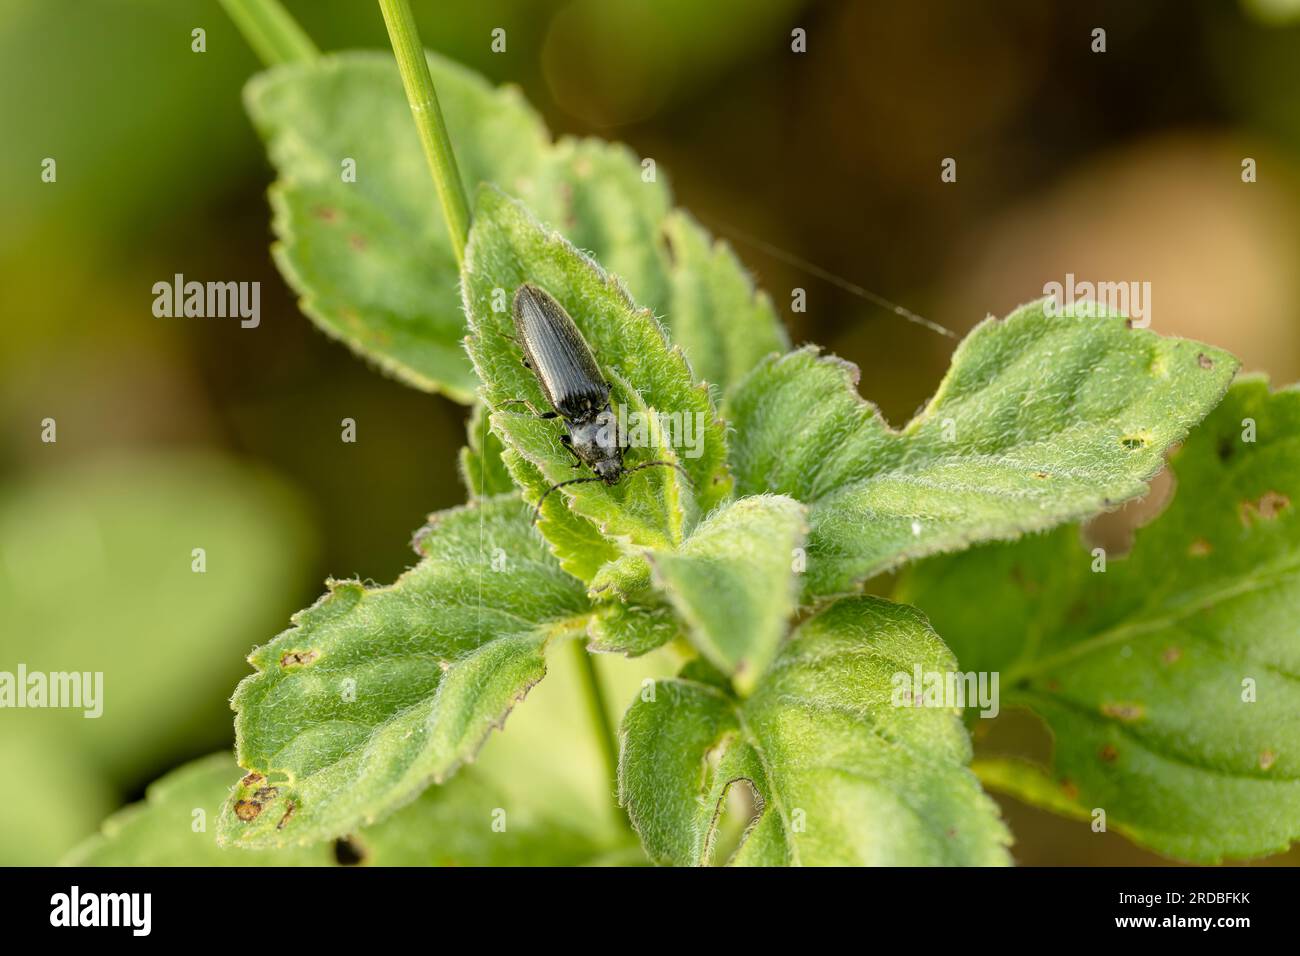 Beetle crawling on a stalk of grass .Insects are very active during the day.The Latin name for the beetle is Ctenicera pectinicornis. Stock Photo